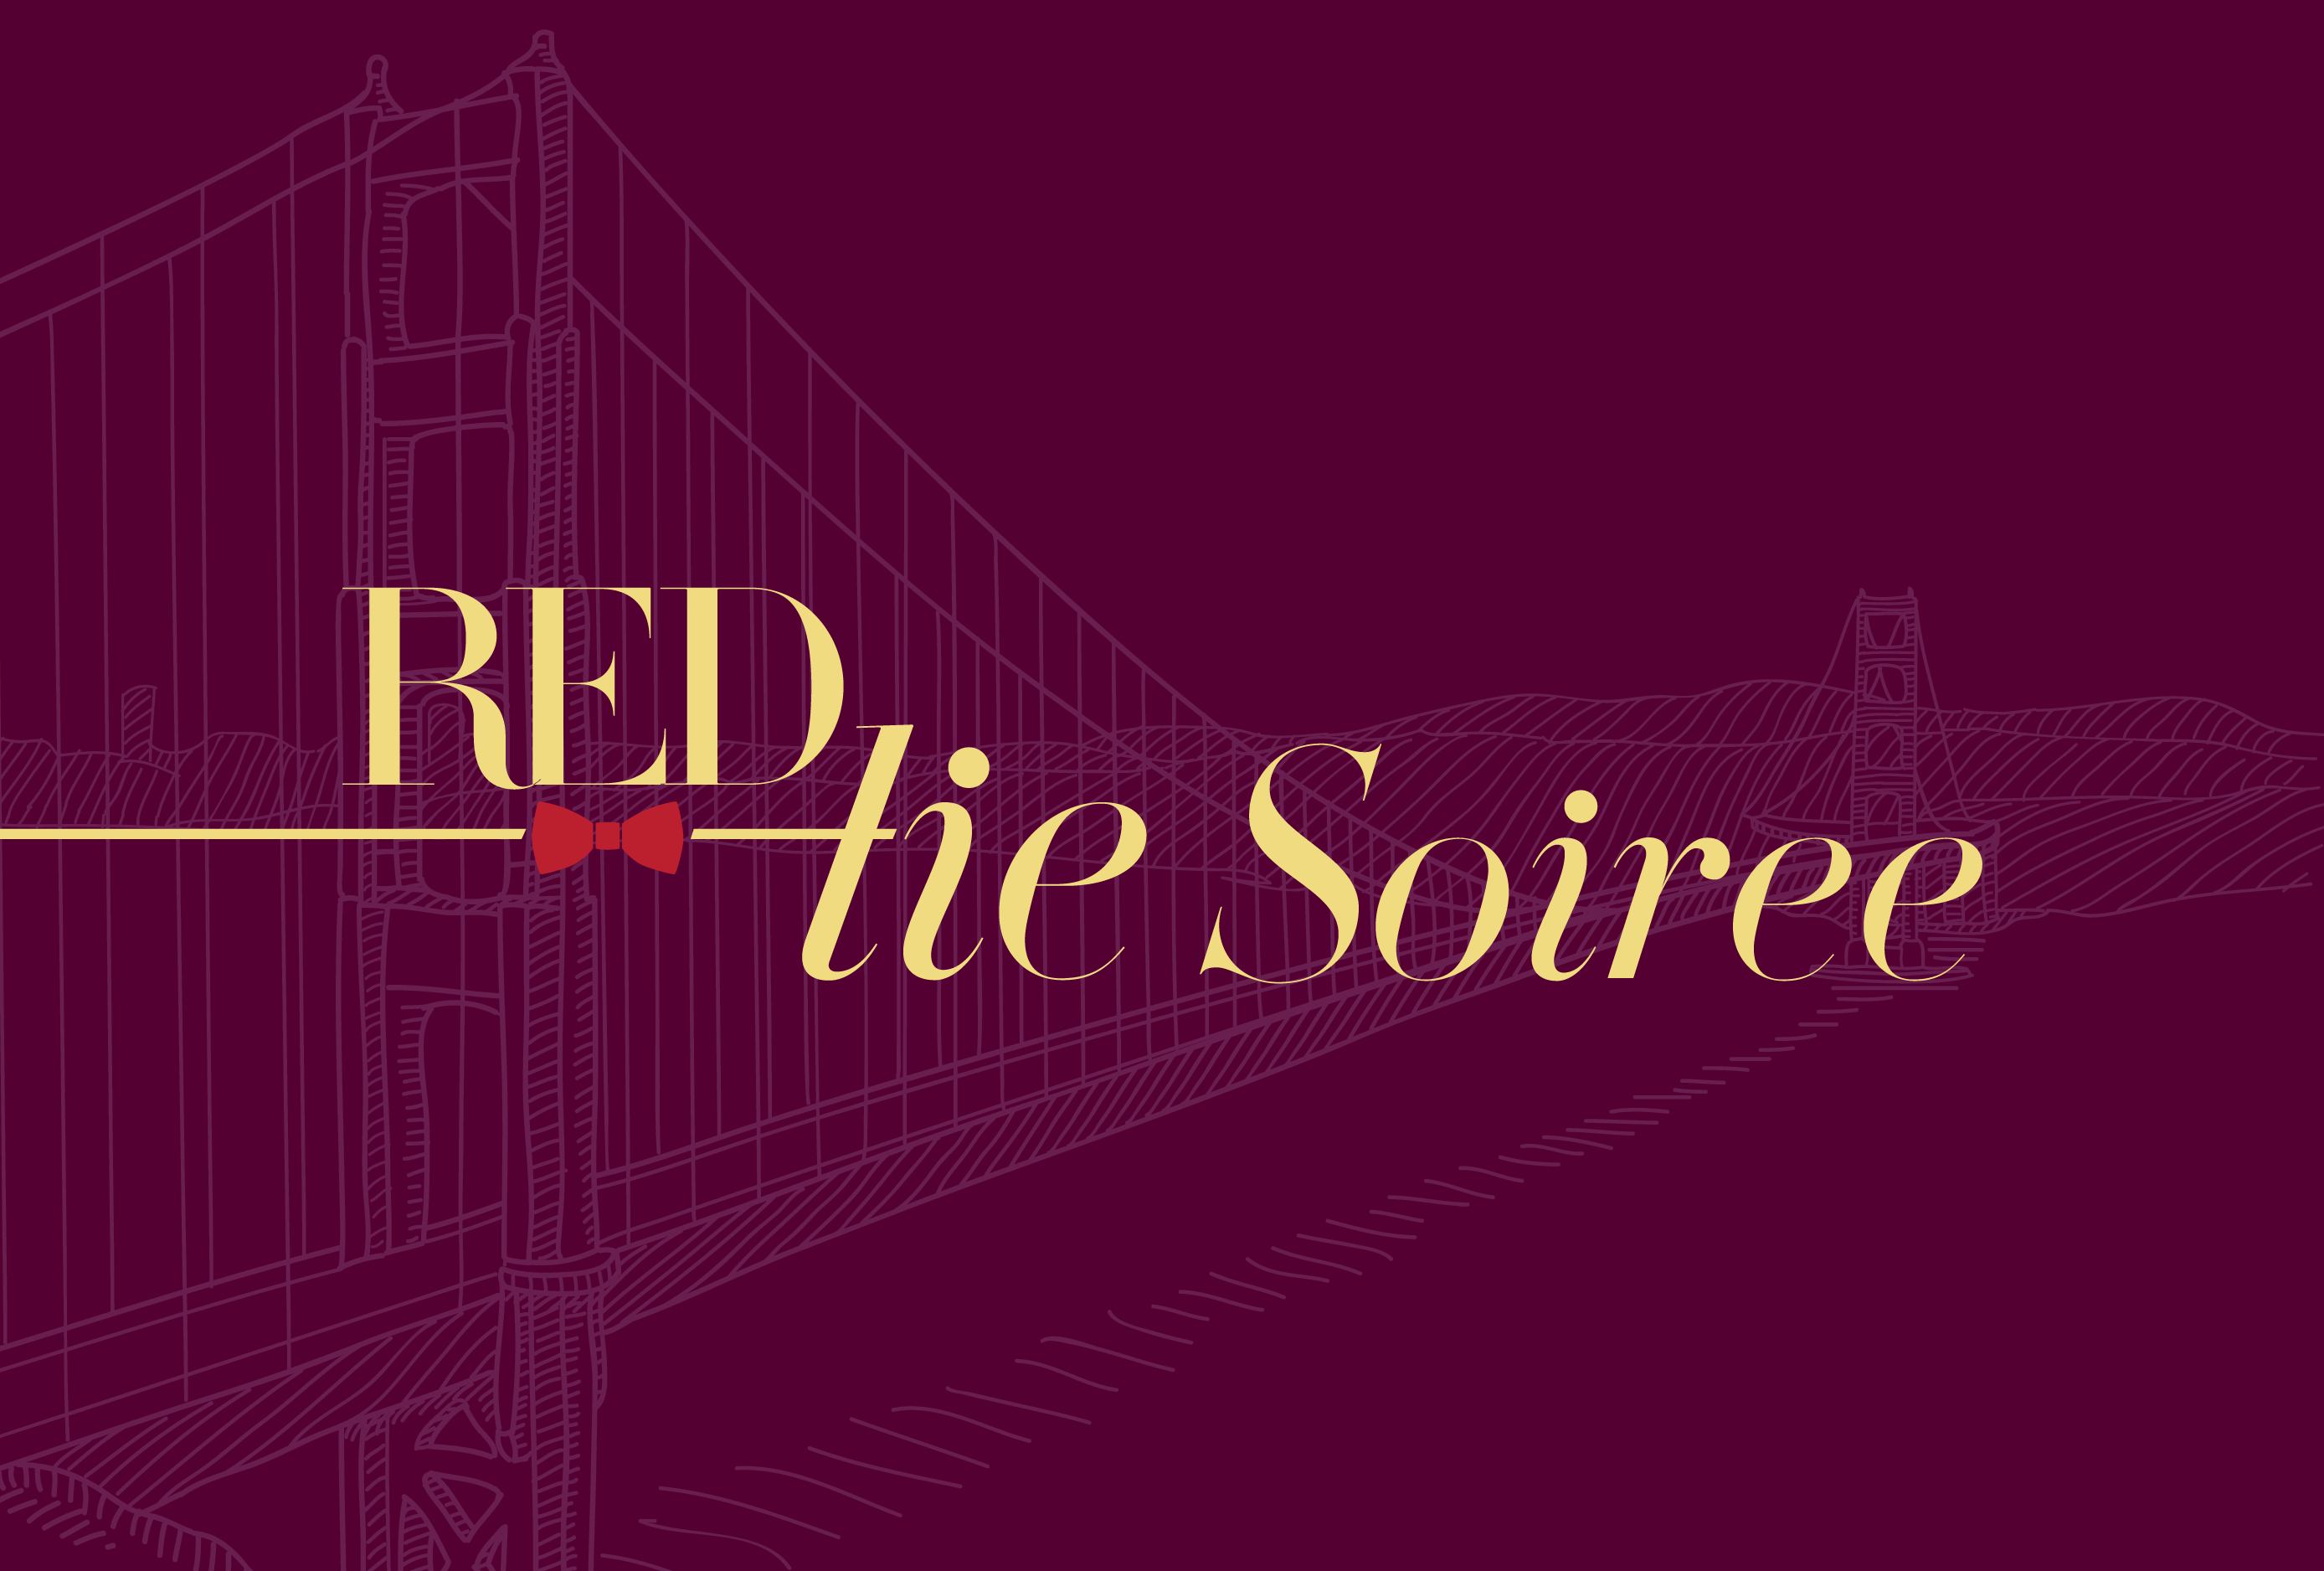 Red Tie Soiree 2022